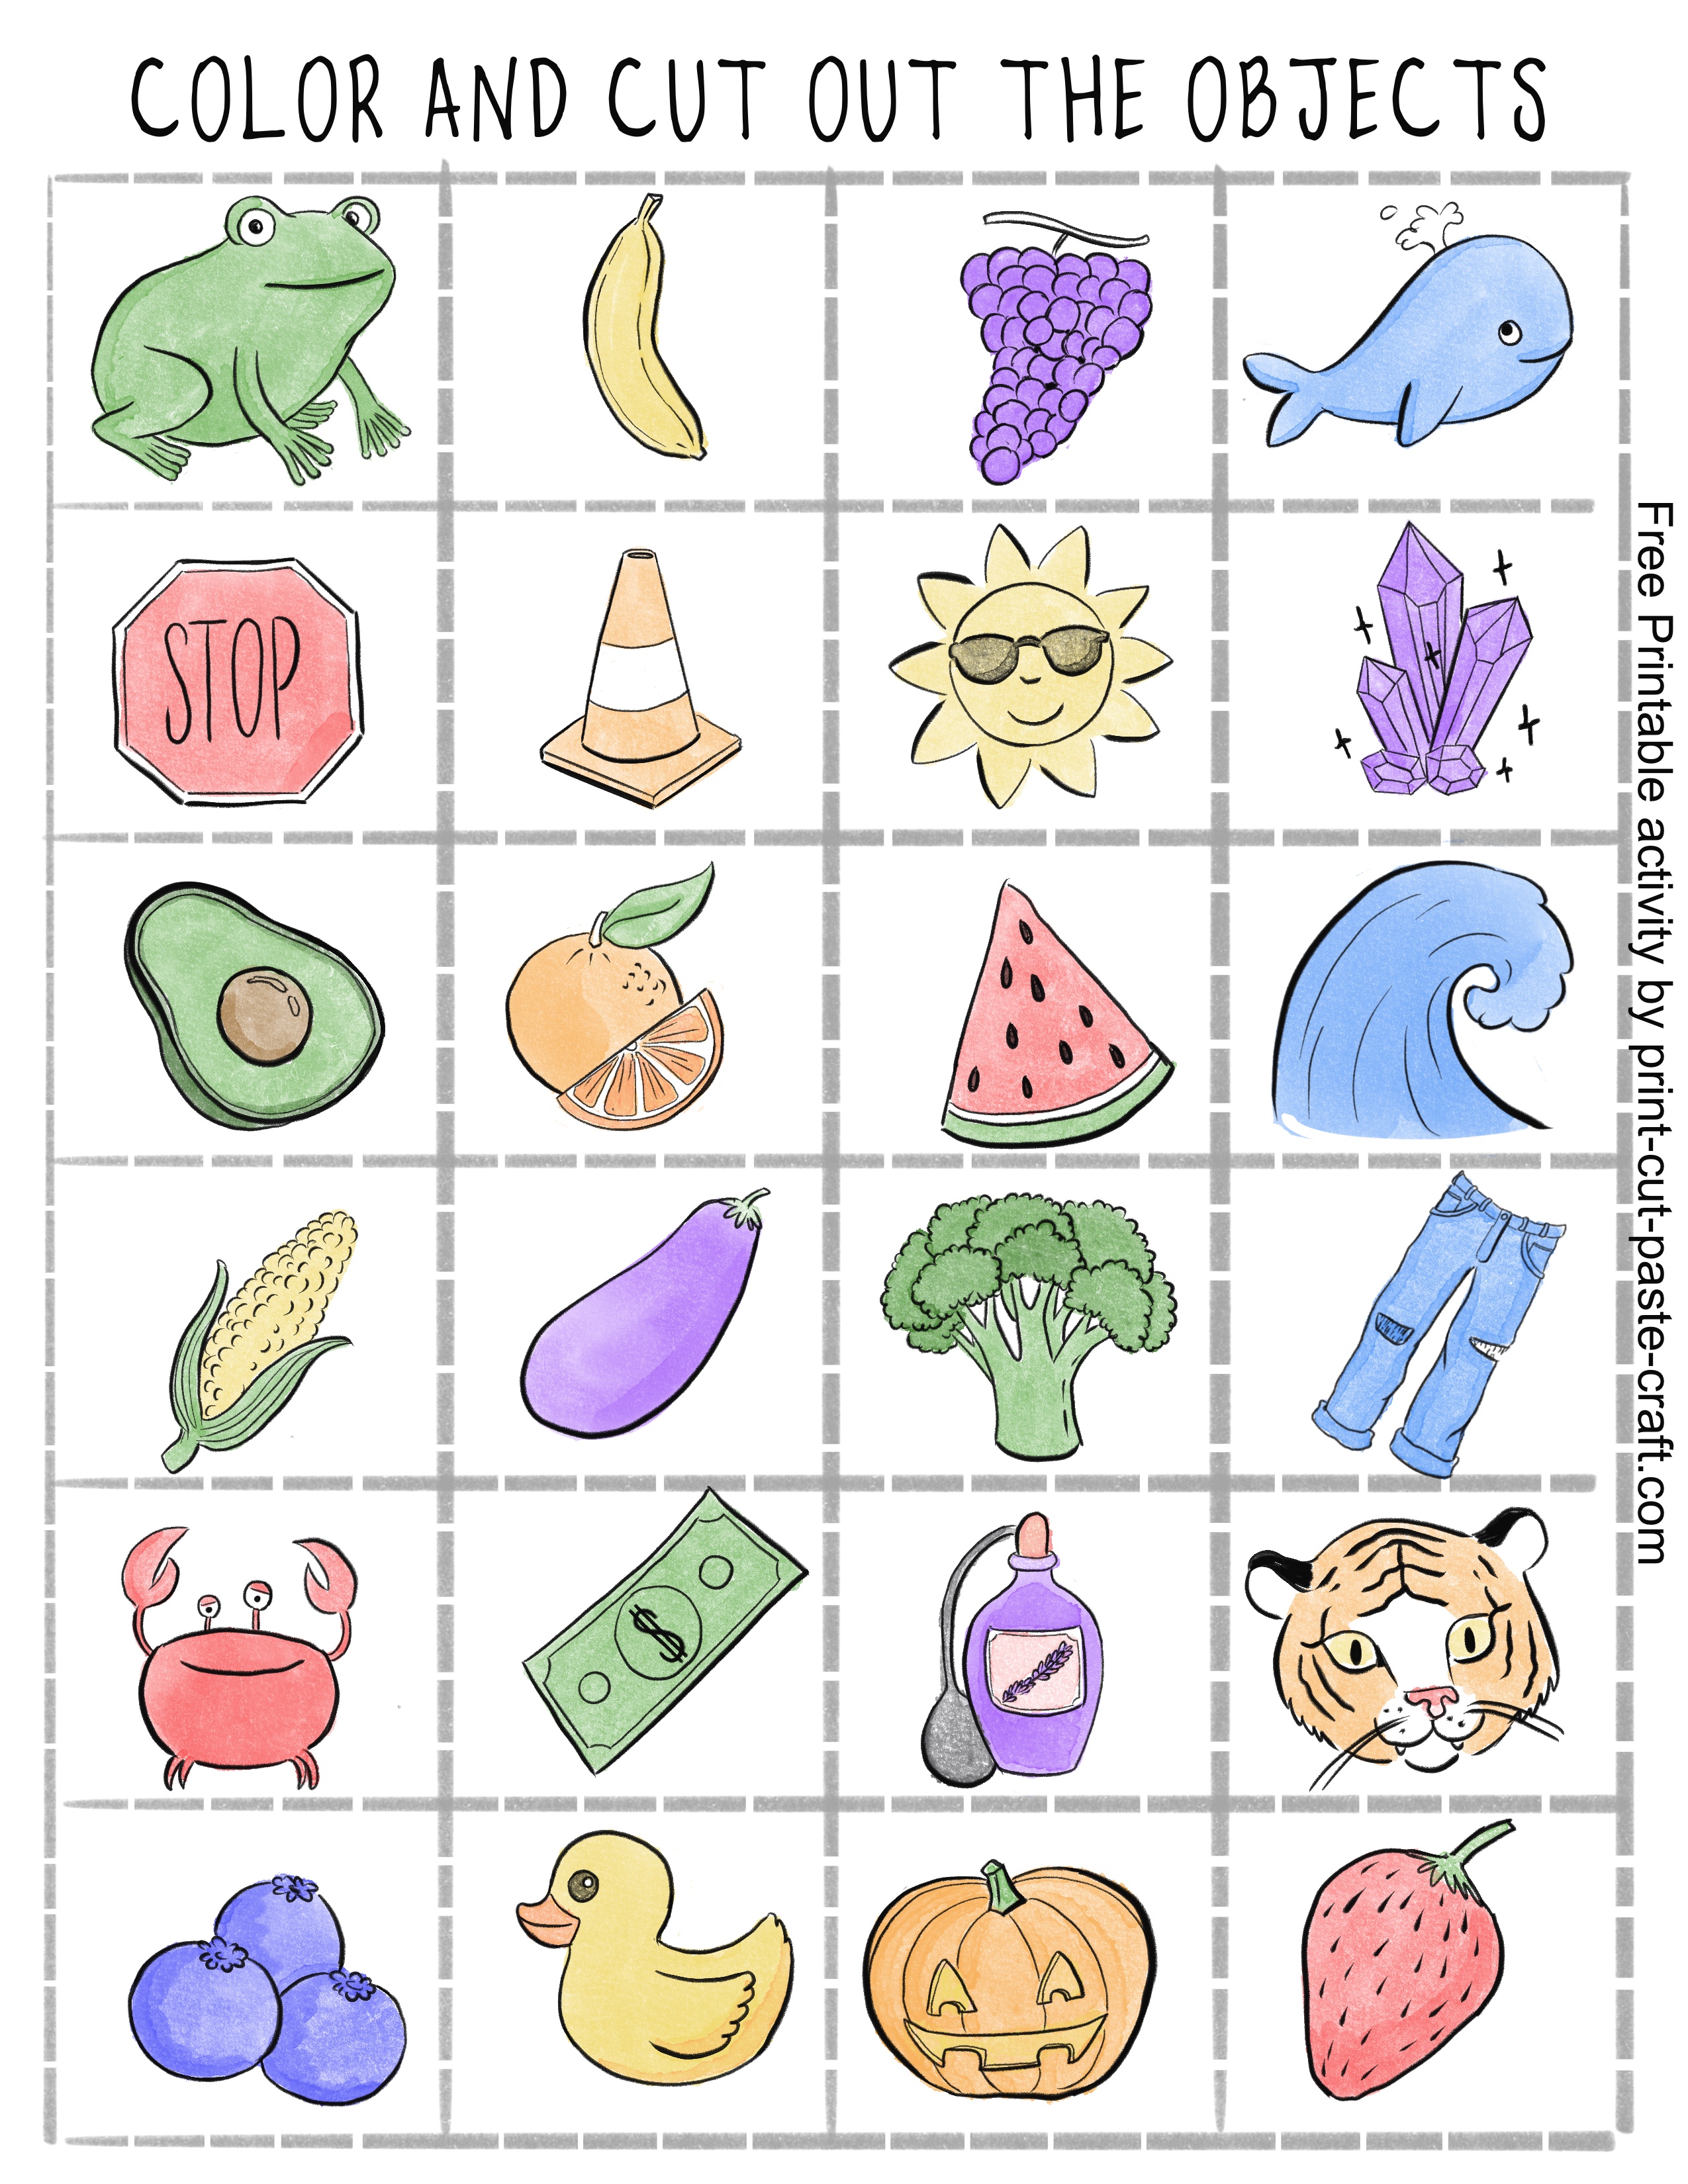 Free Printable Color Cut and Paste activity: sorting objects, food and animals by color.